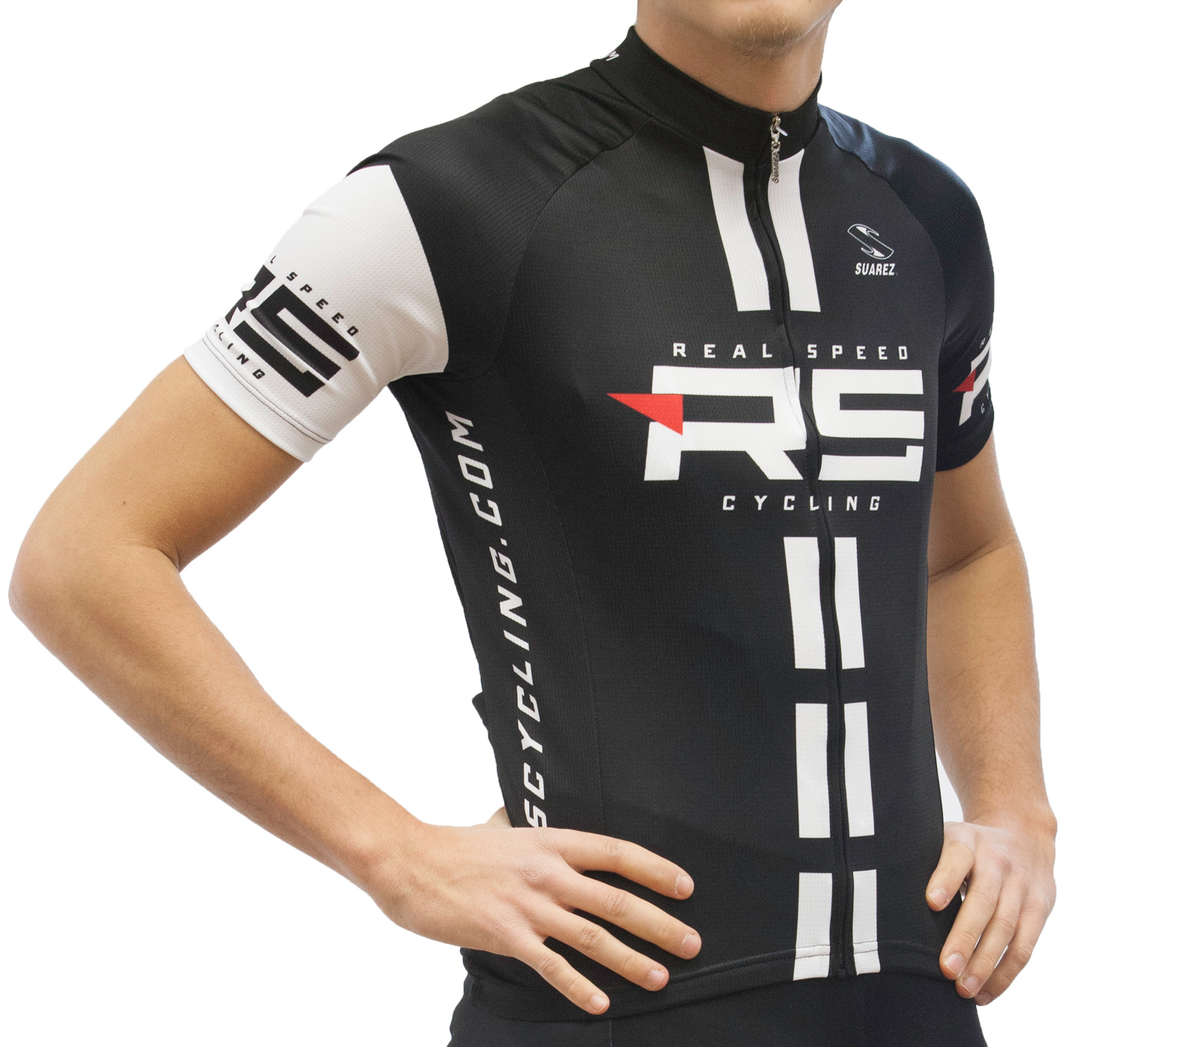 Real Speed Cycling Jersey - Racer Sportif